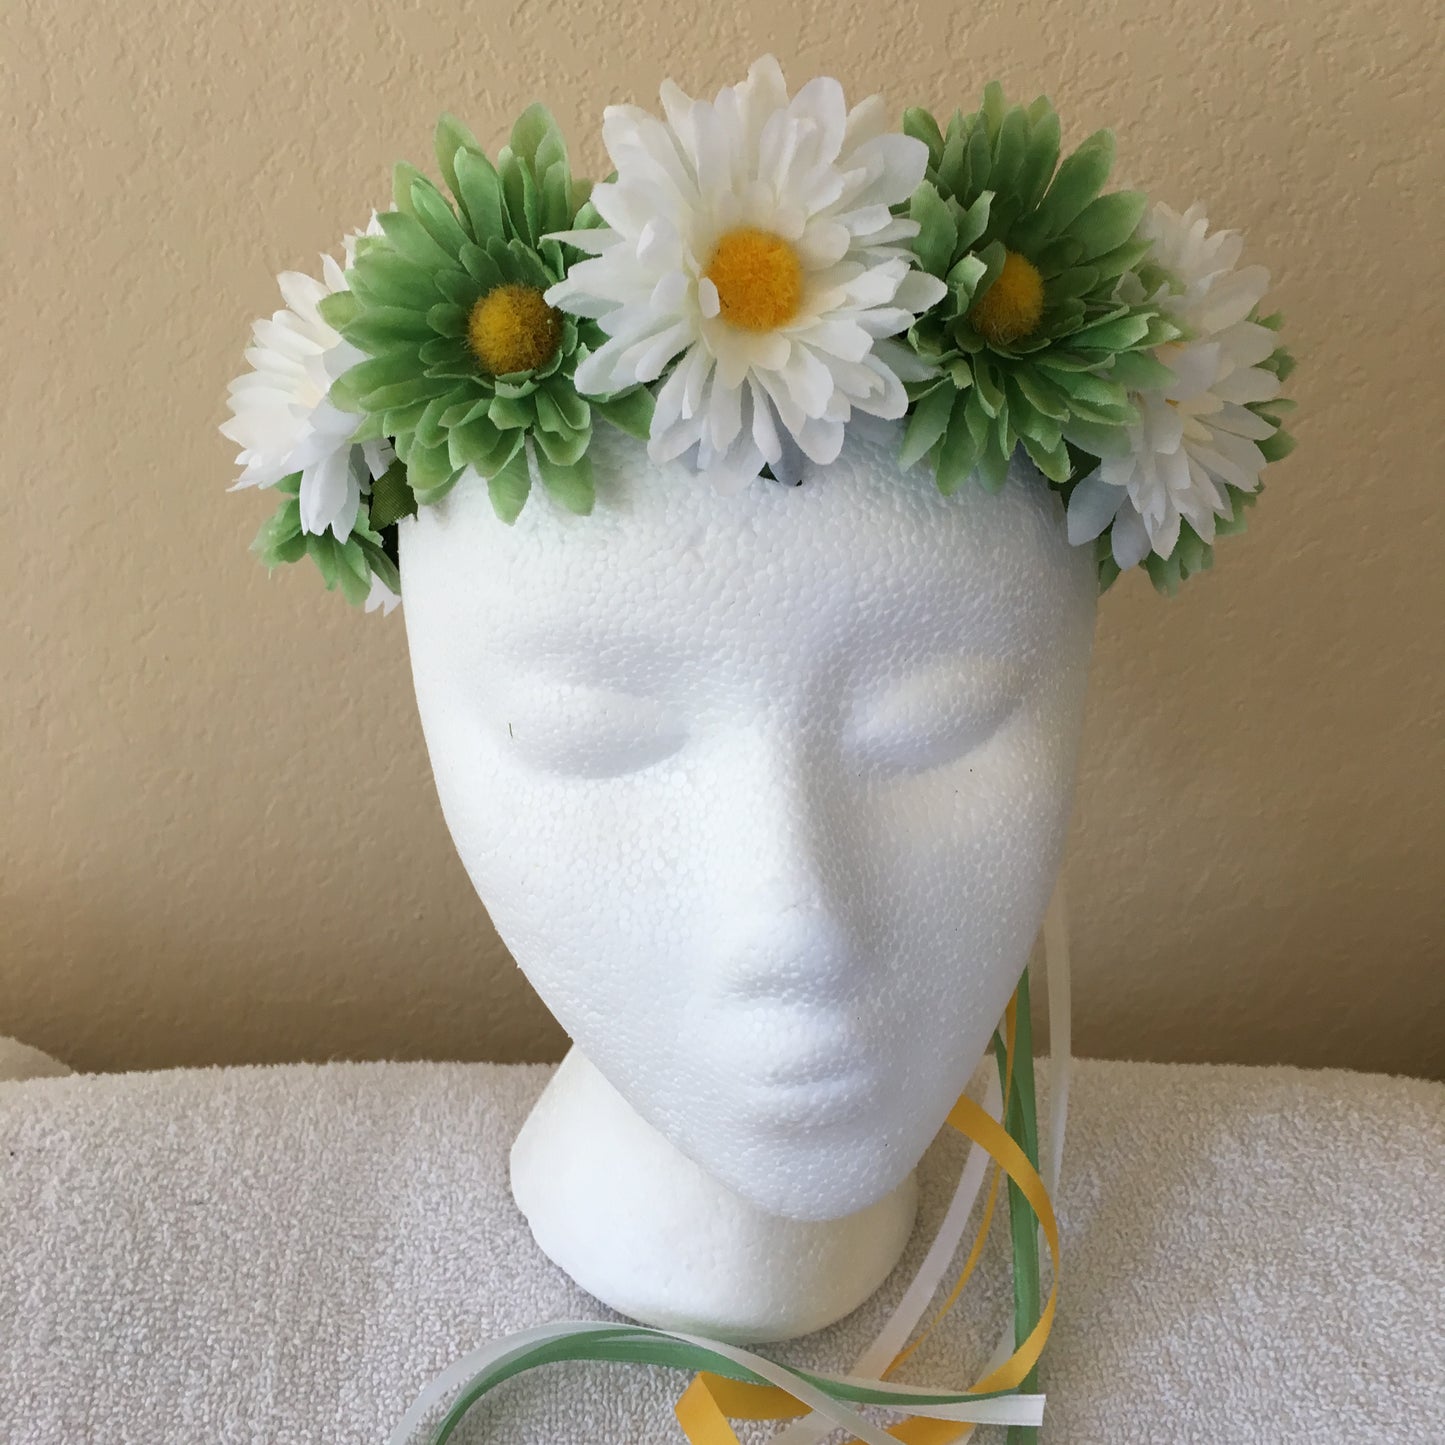 Small Wreath - Every other green & white daisies (4)